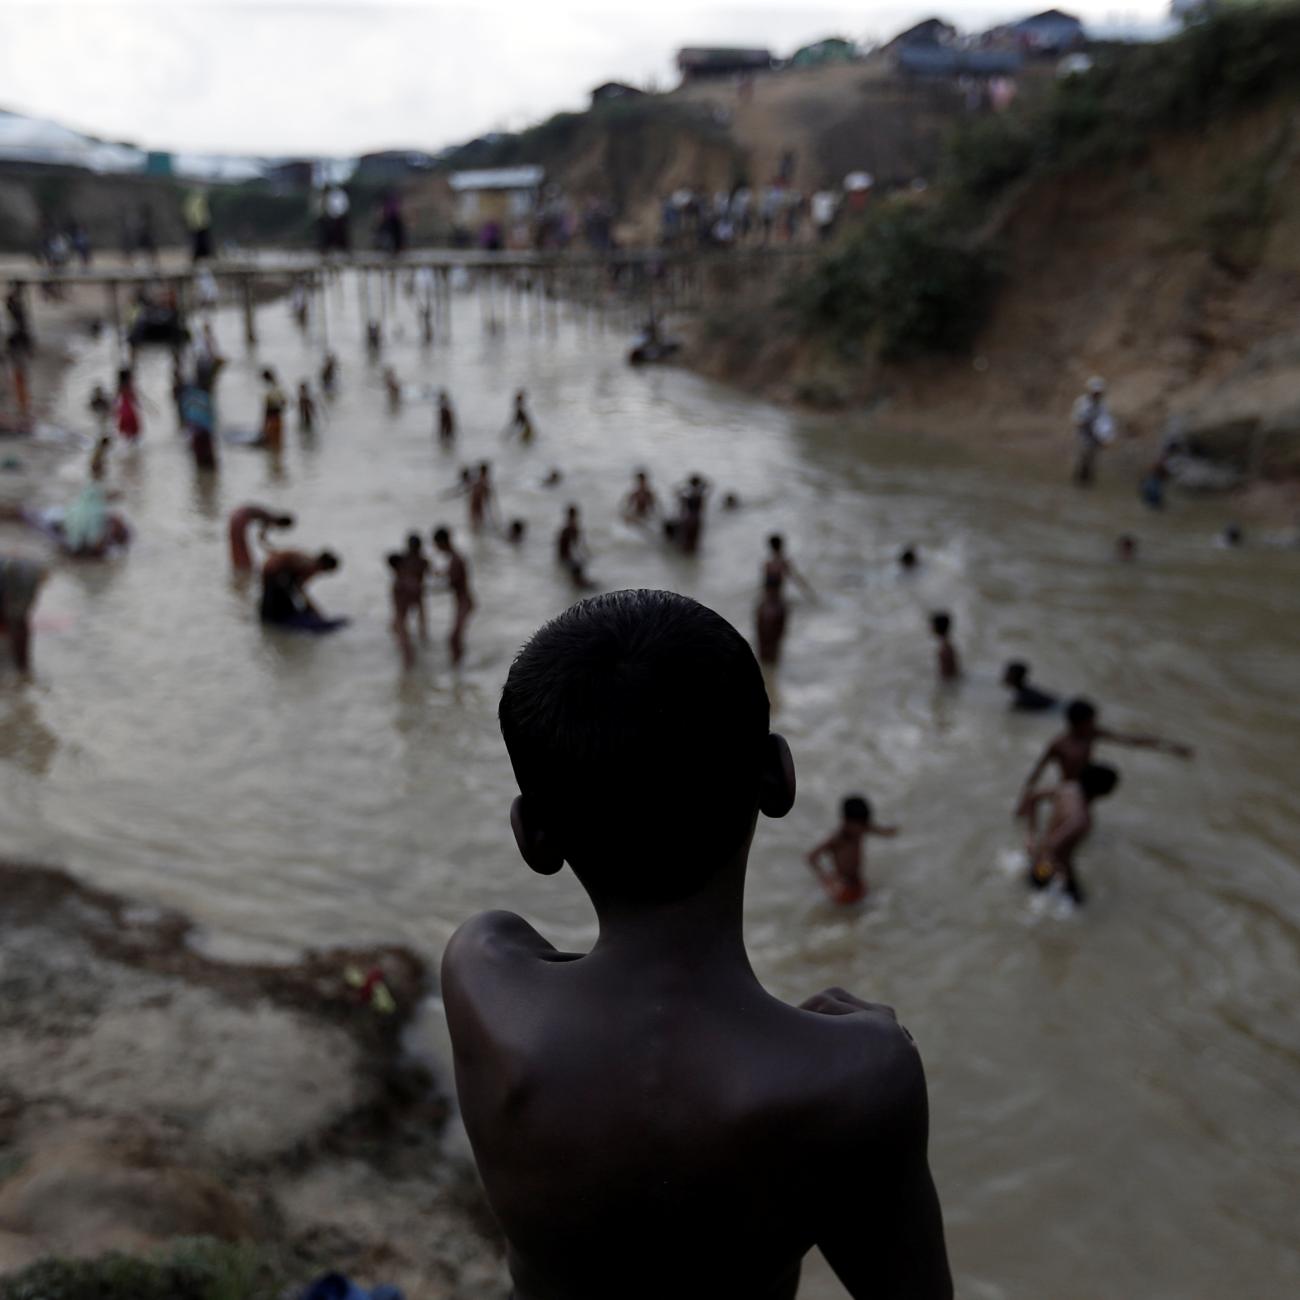 Rohingya refugees swim in a river running through a camp in Cox's Bazar